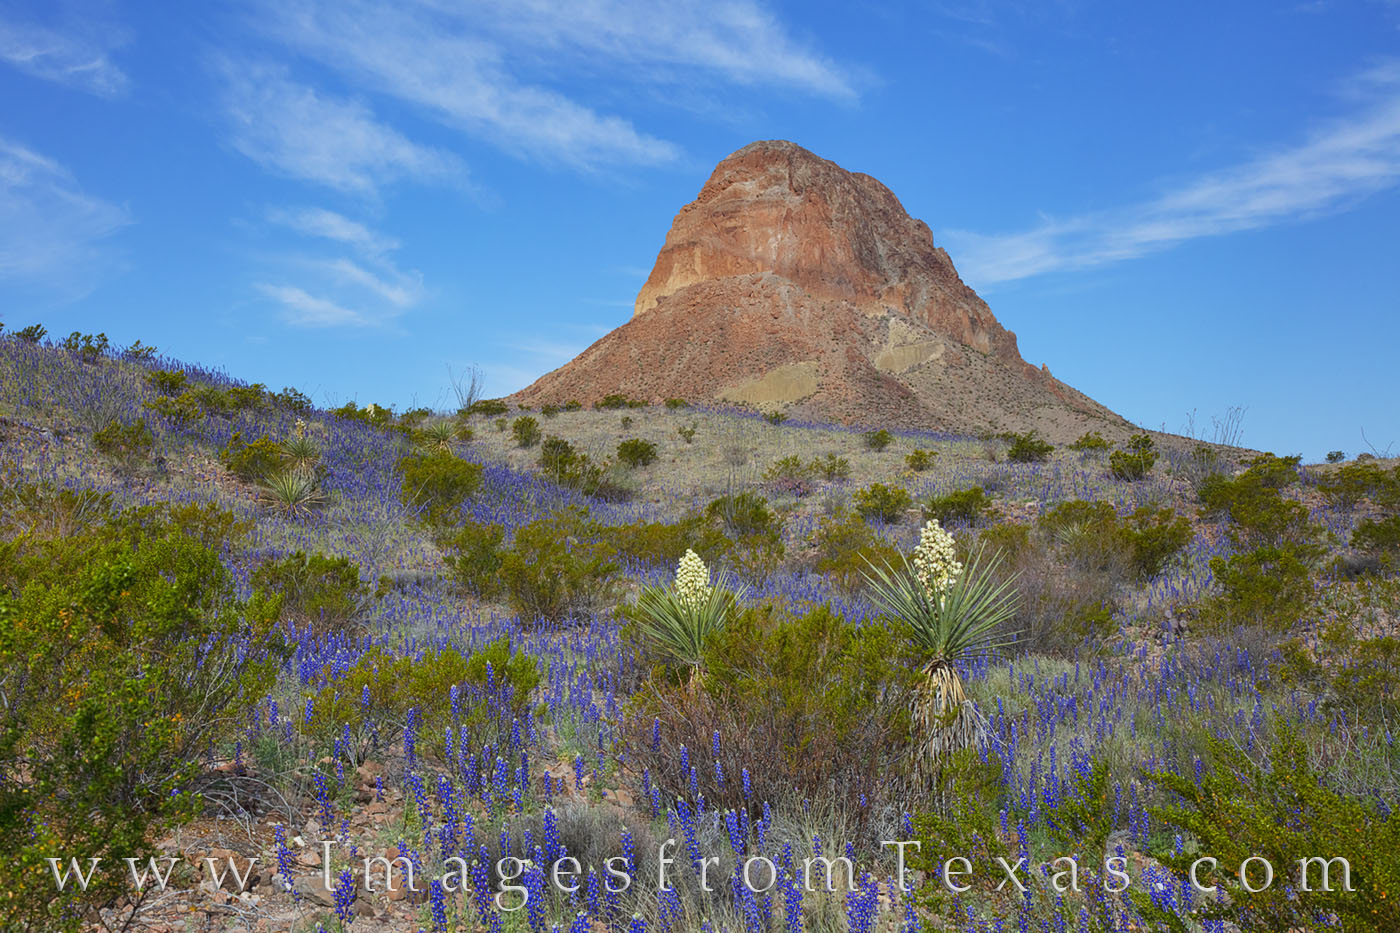 From River Road West, this view shows a side of Cerro Castellan not often seen. The bluebonnets in early March painted the foreground...